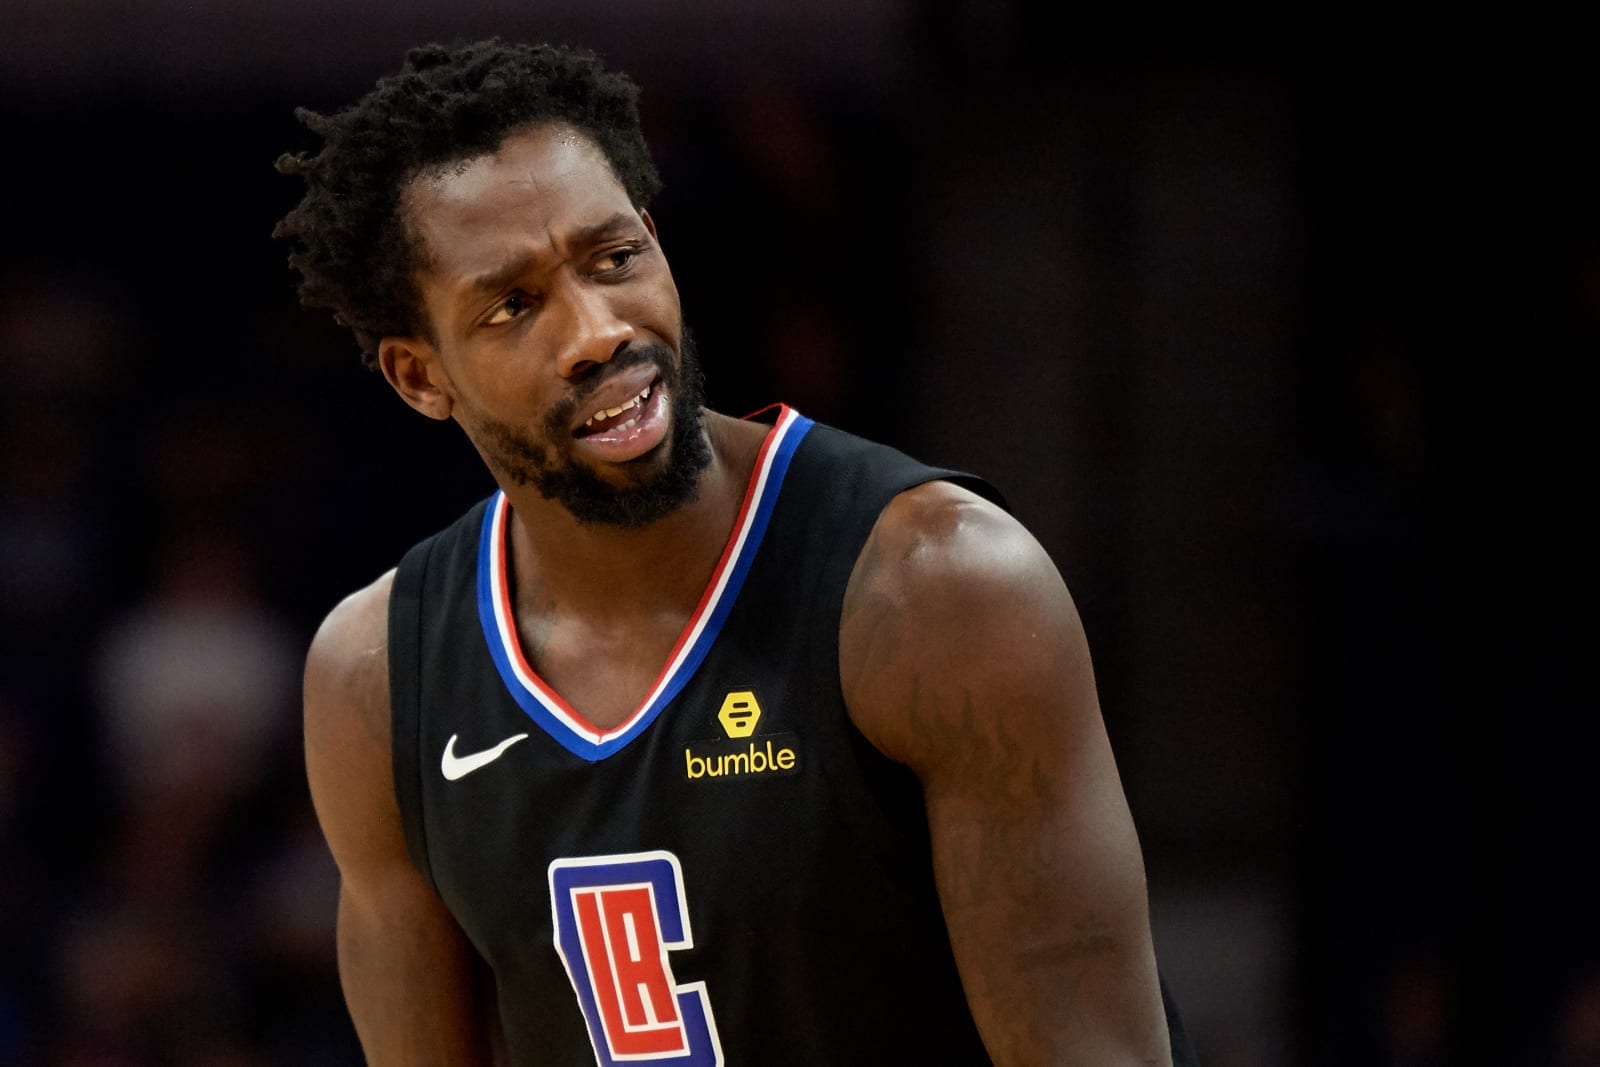 Patrick Beverley of the Clippers